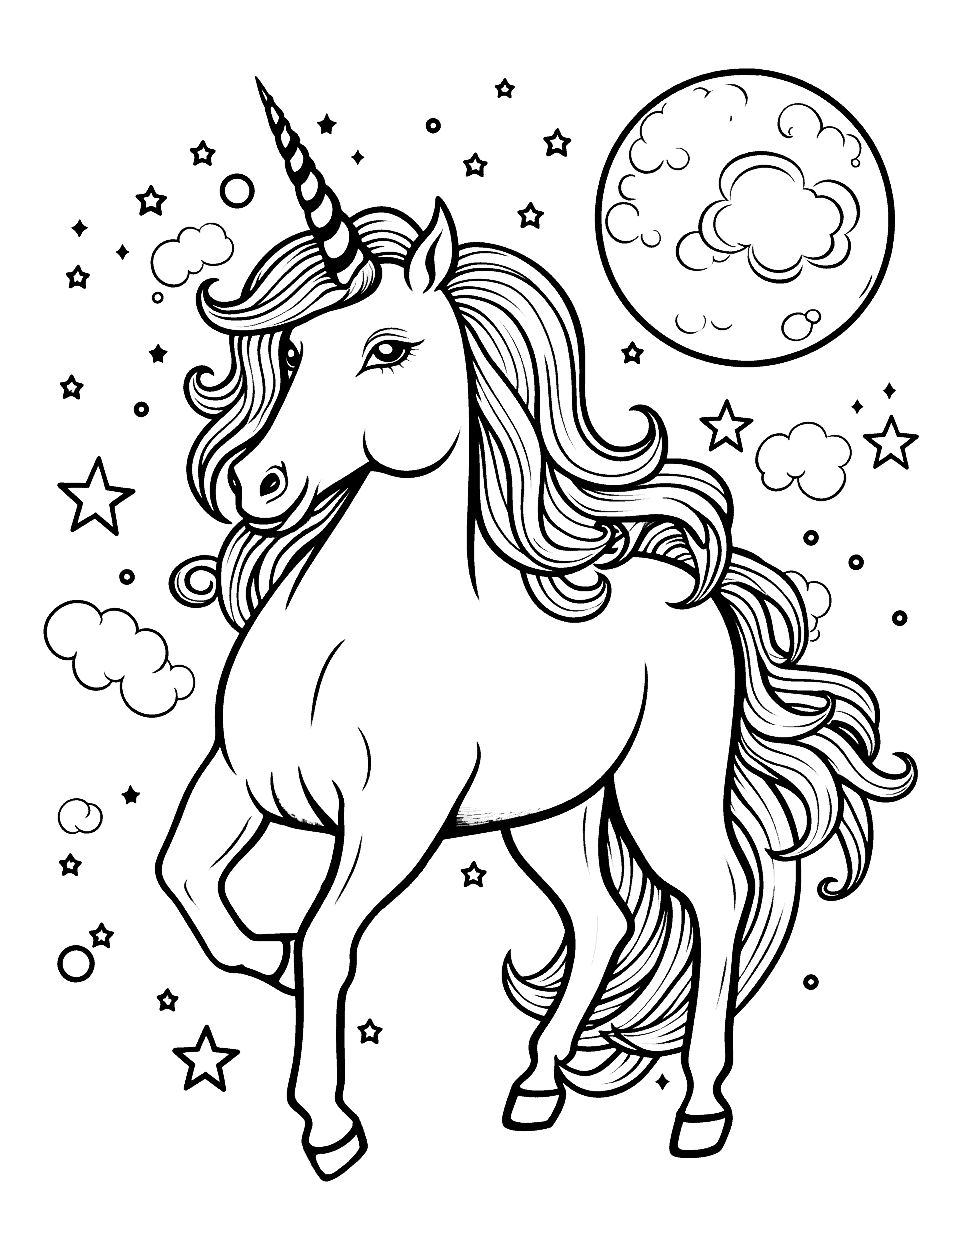 Unicorn in Space Coloring Page - A unique coloring page showcasing a unicorn exploring the cosmos, surrounded by planets and stars.